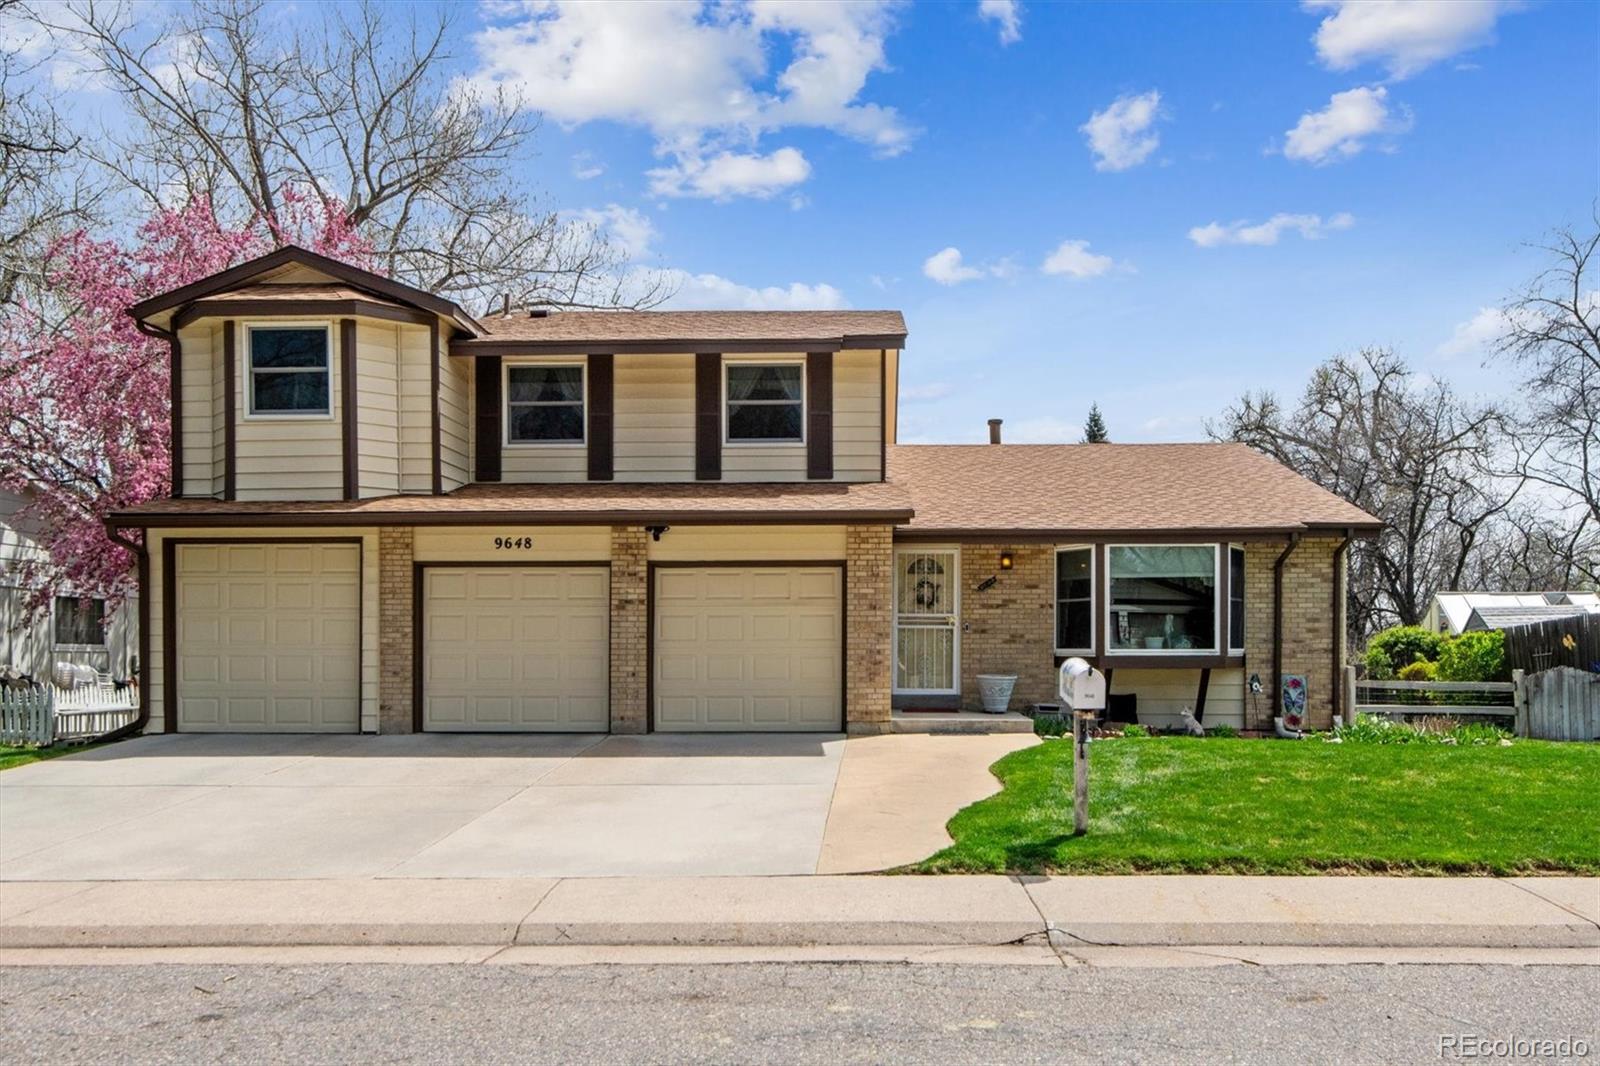 9648 W 74th Place, arvada MLS: 8402470 Beds: 4 Baths: 3 Price: $650,000